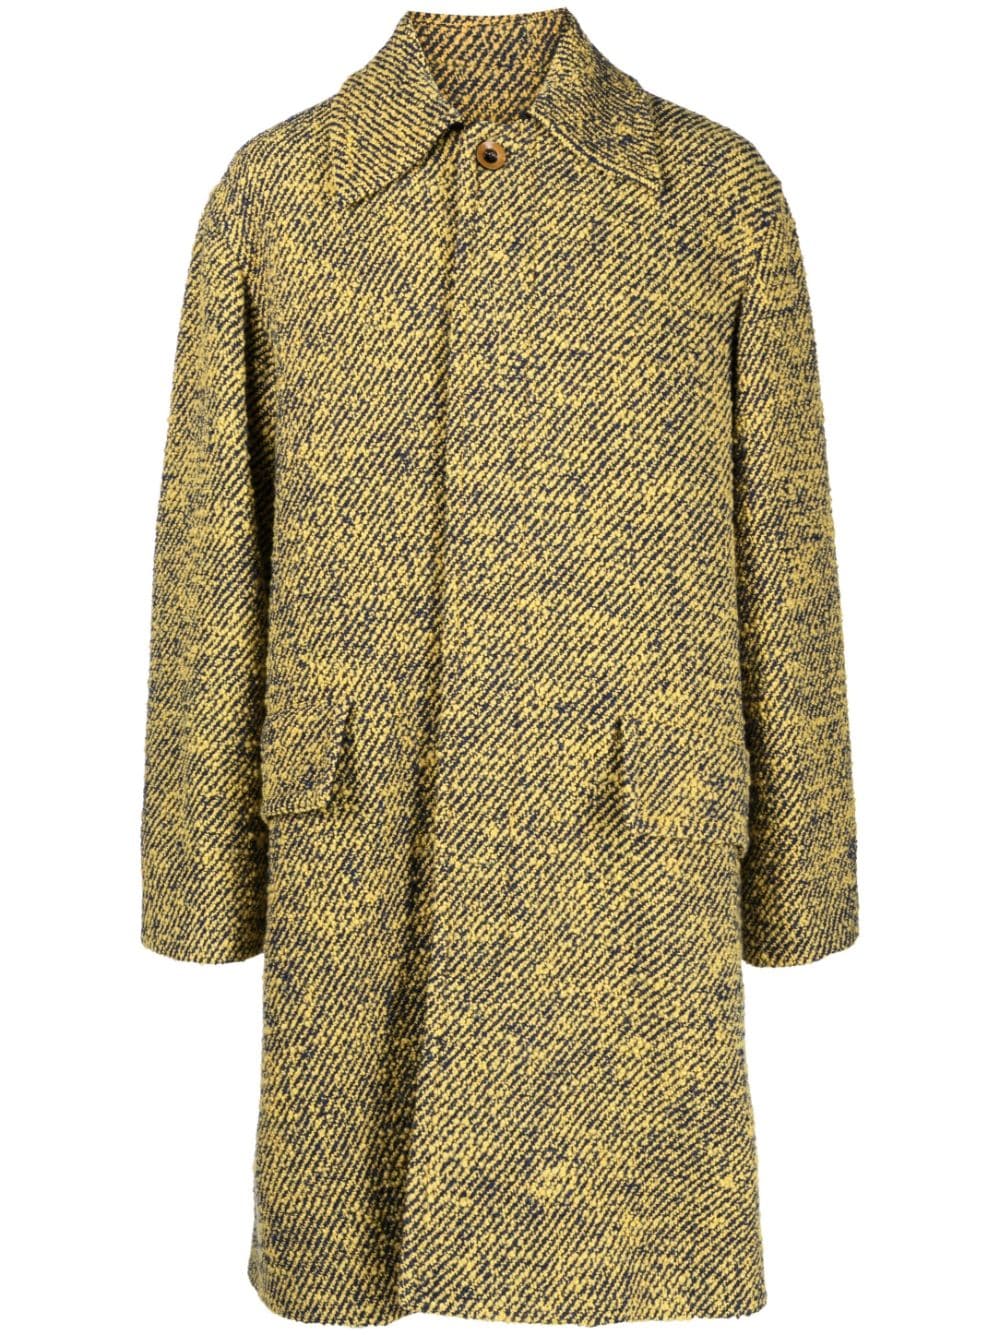 Wales Bonner Yellow André Single-breasted Wool Coat